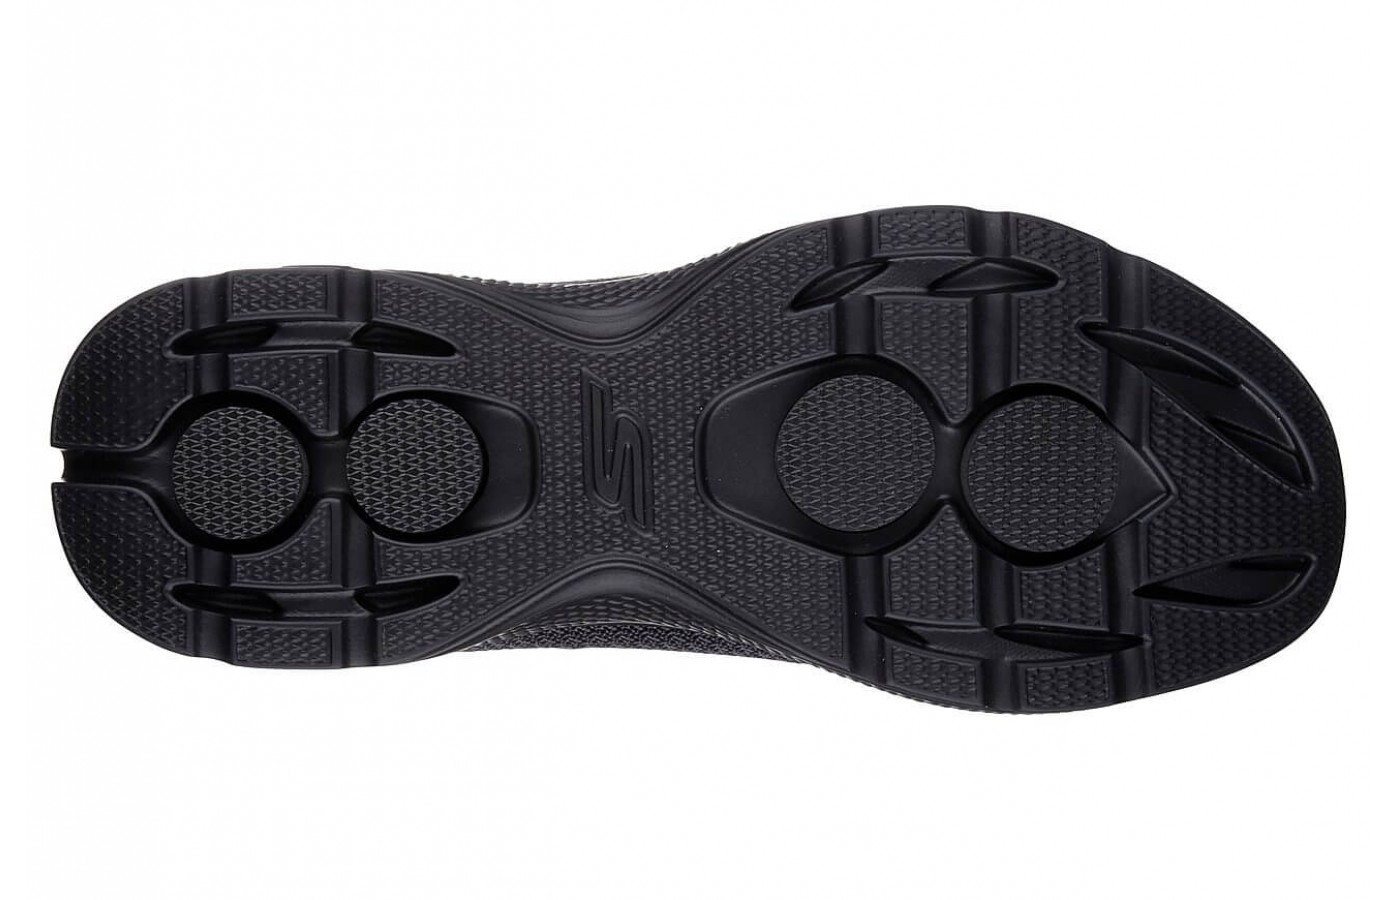 A bottom view of the Skechers GoWalk 4.